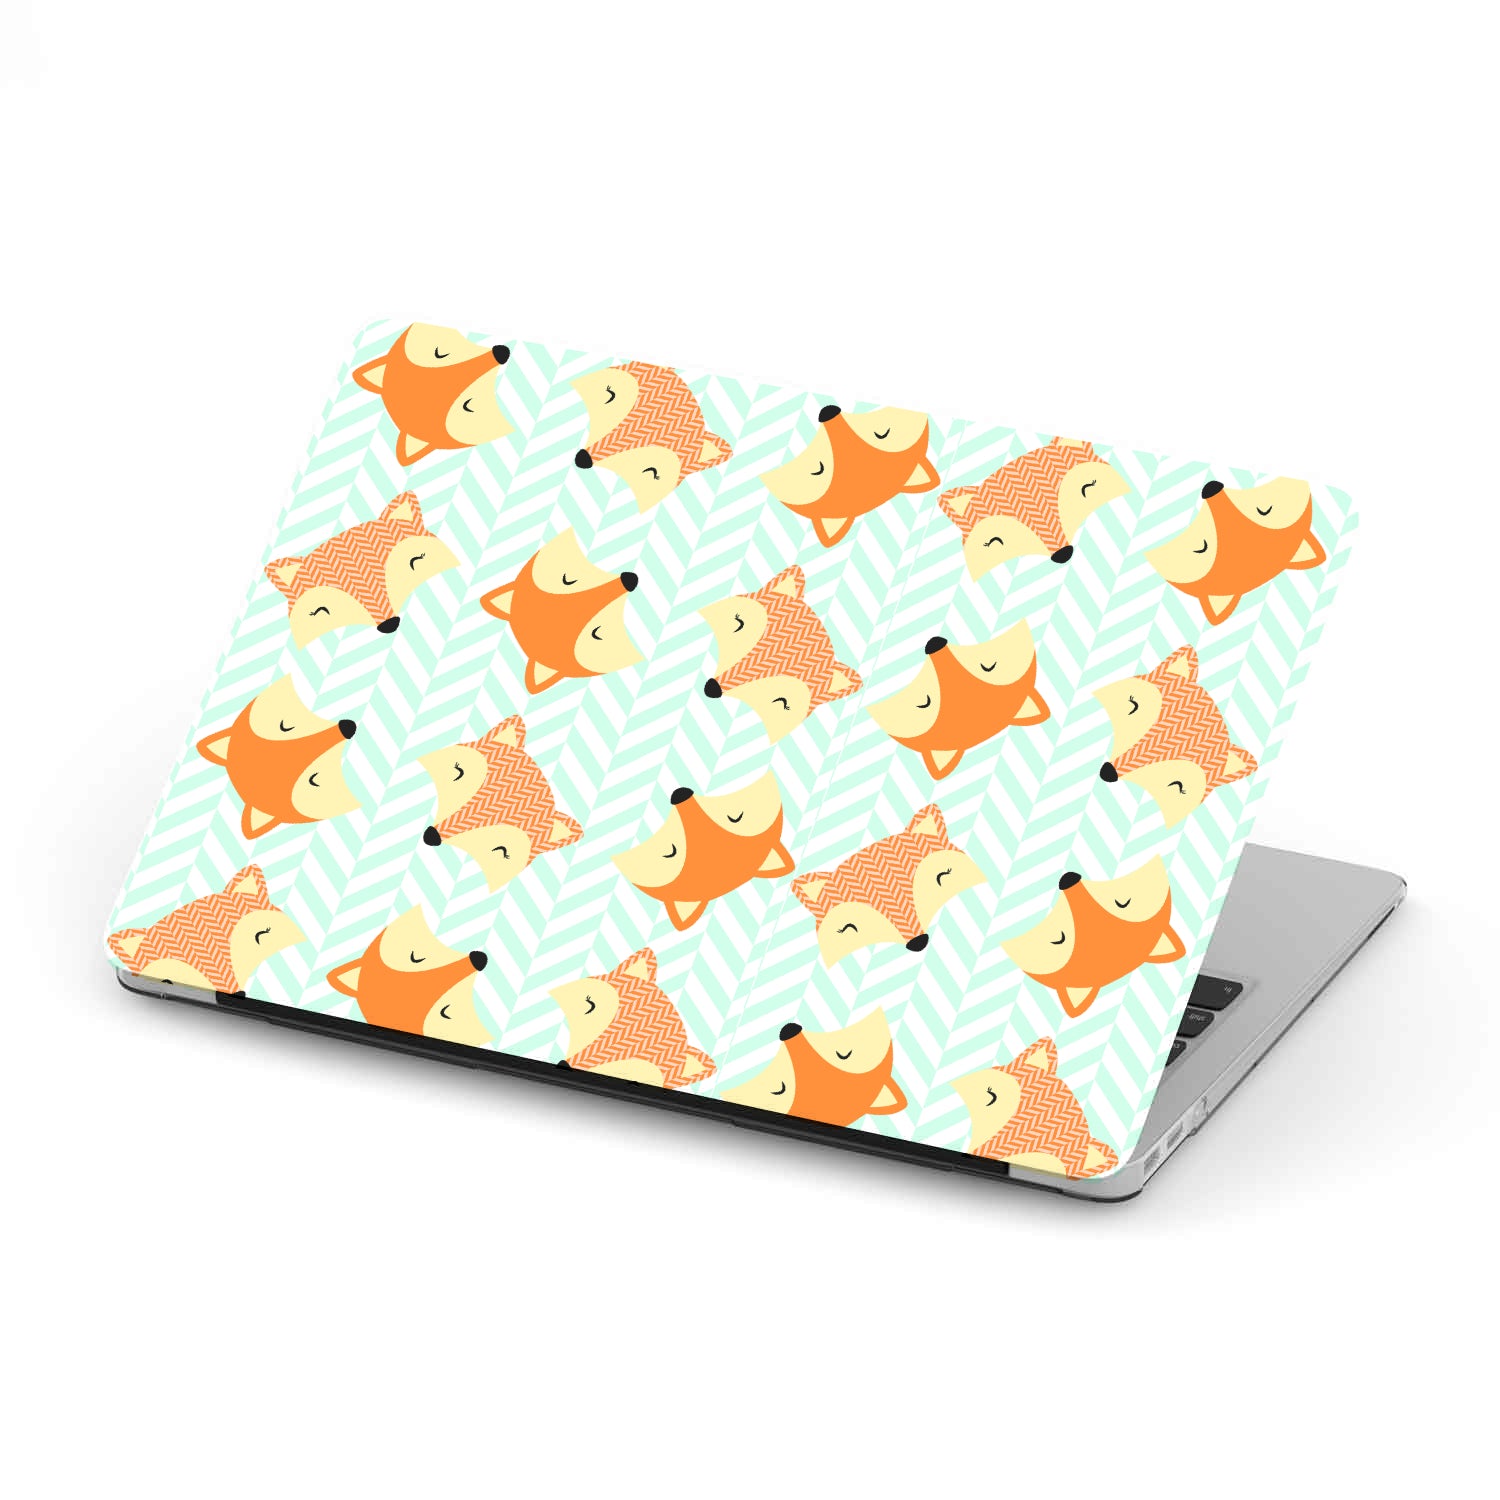 Macbook Cover Foxes 2 Paper 09